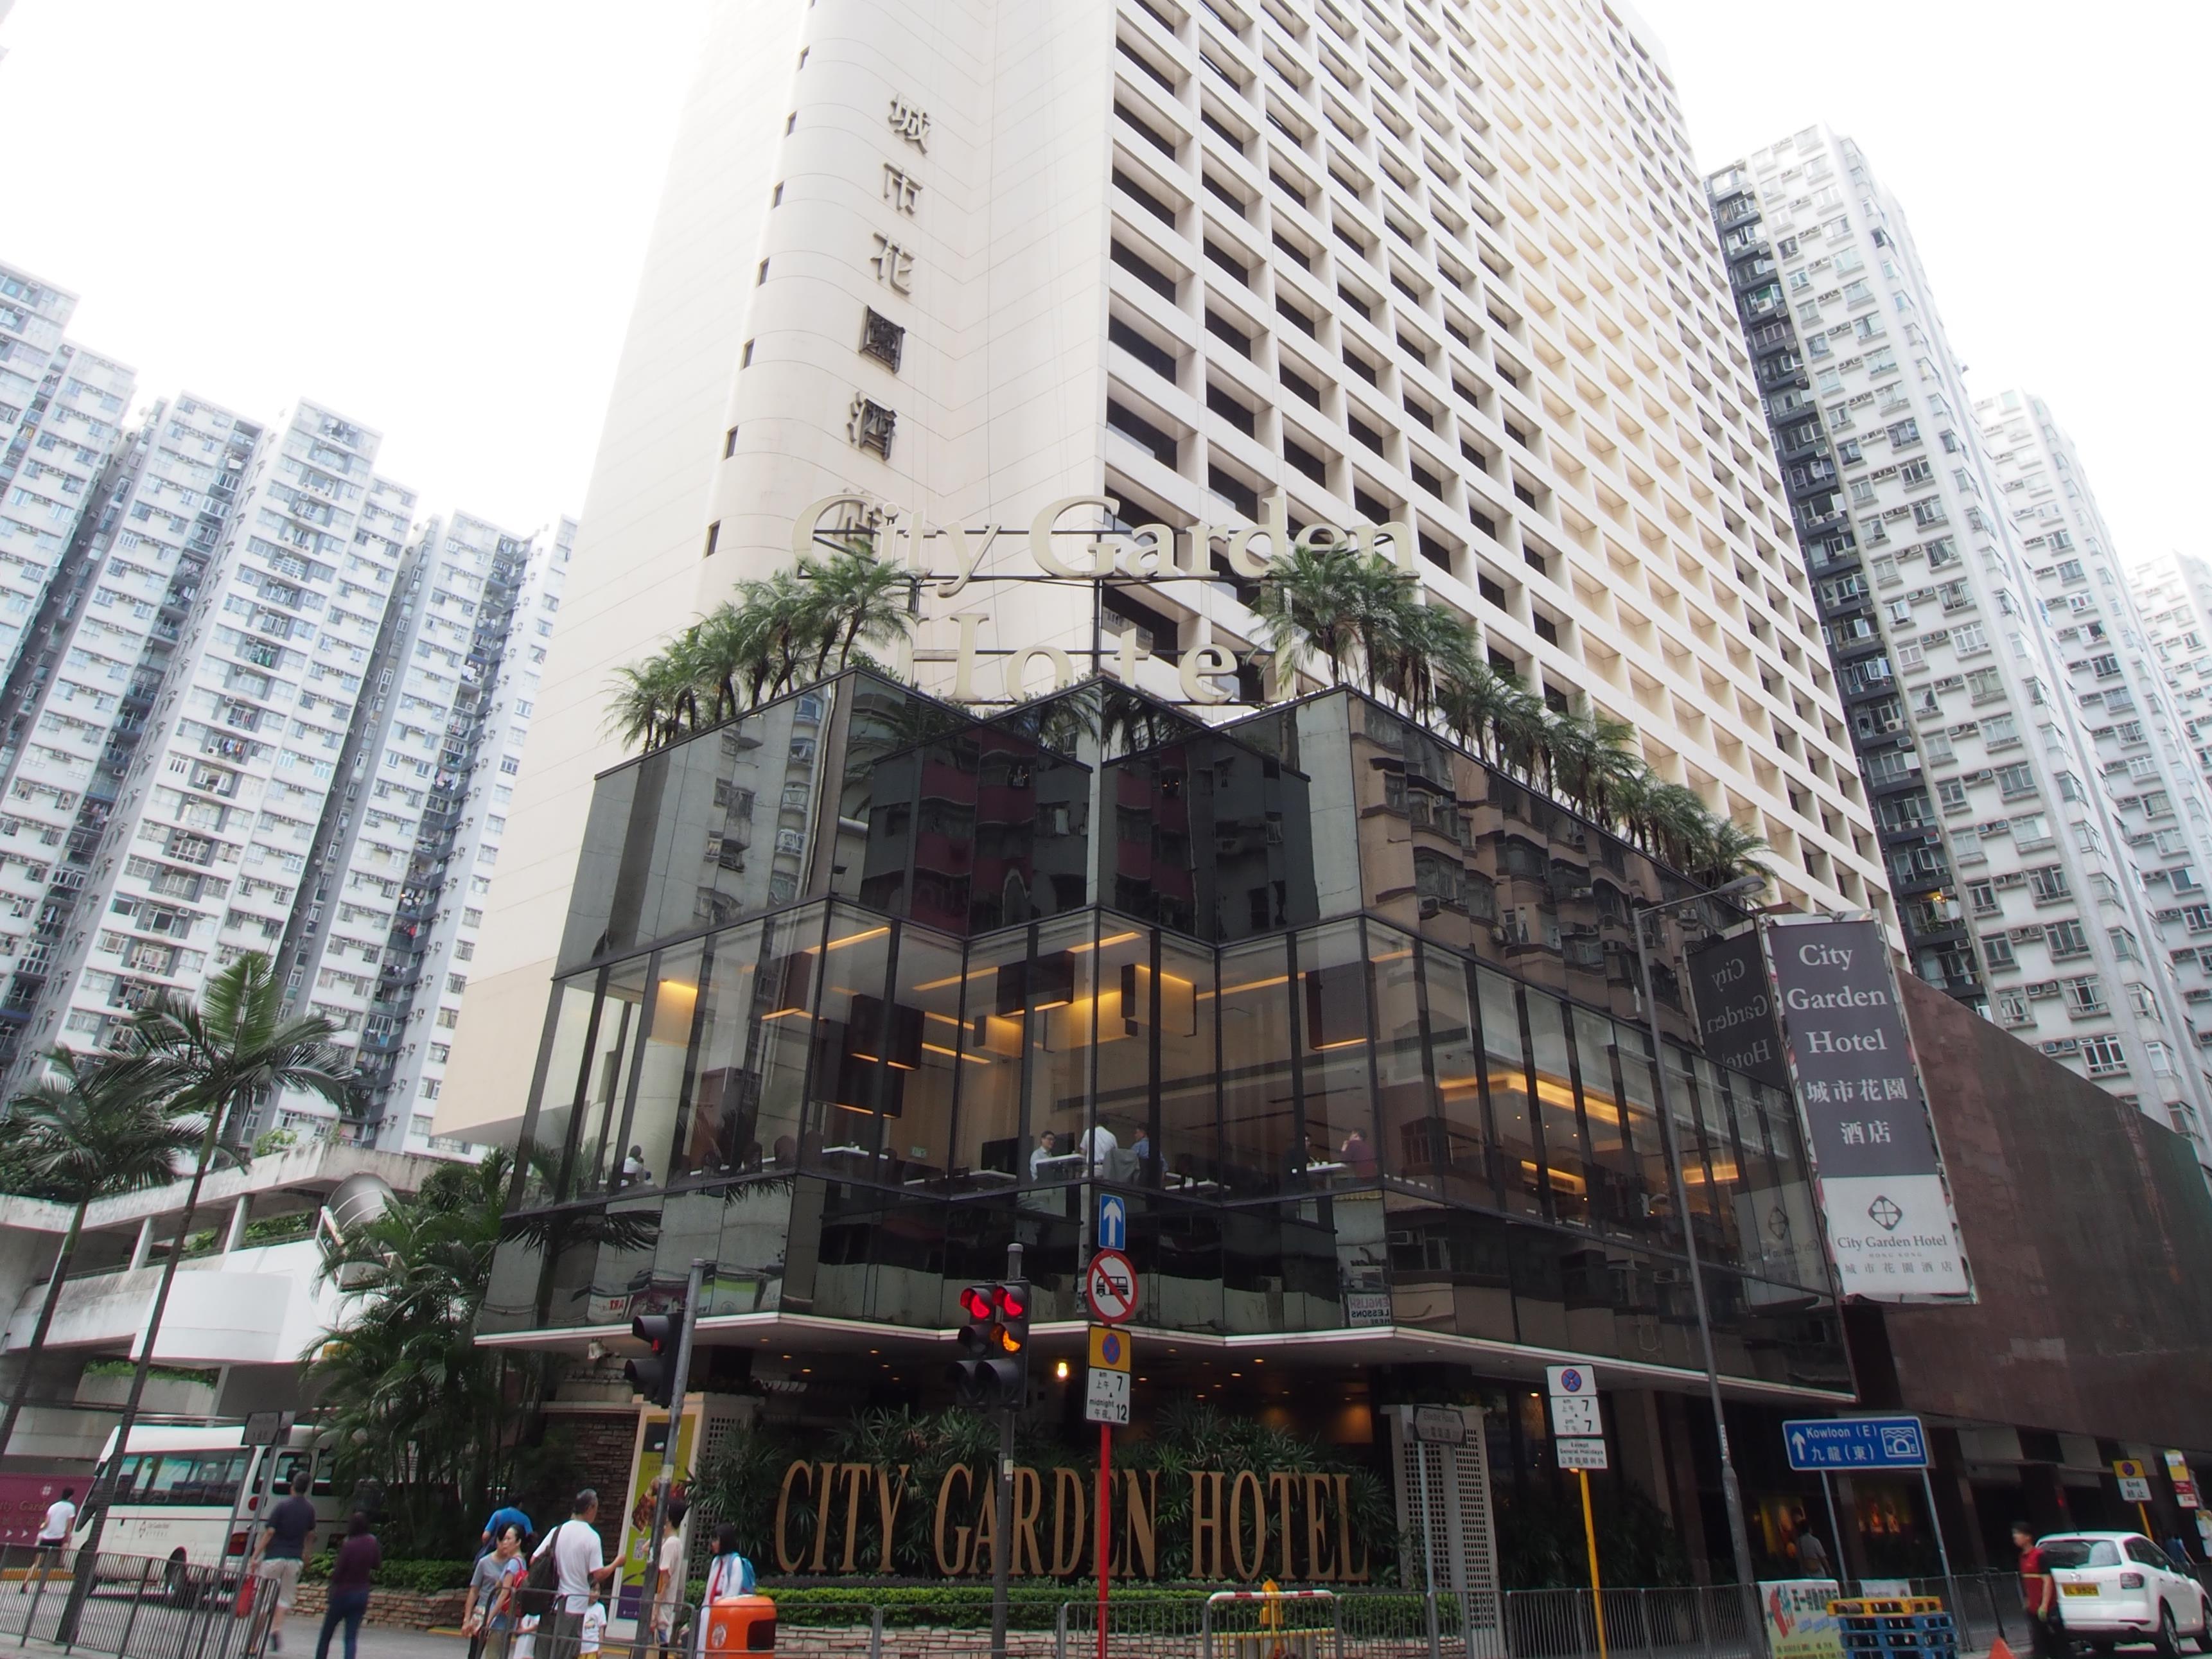 City Garden Hotel Hong Kong FAQ 2017, What facilities are there in City Garden Hotel Hong Kong 2017, What Languages Spoken are Supported in City Garden Hotel Hong Kong 2017, Which payment cards are accepted in City Garden Hotel Hong Kong , Hong Kong City Garden Hotel room facilities and services Q&A 2017, Hong Kong City Garden Hotel online booking services 2017, Hong Kong City Garden Hotel address 2017, Hong Kong City Garden Hotel telephone number 2017,Hong Kong City Garden Hotel map 2017, Hong Kong City Garden Hotel traffic guide 2017, how to go Hong Kong City Garden Hotel, Hong Kong City Garden Hotel booking online 2017, Hong Kong City Garden Hotel room types 2017.